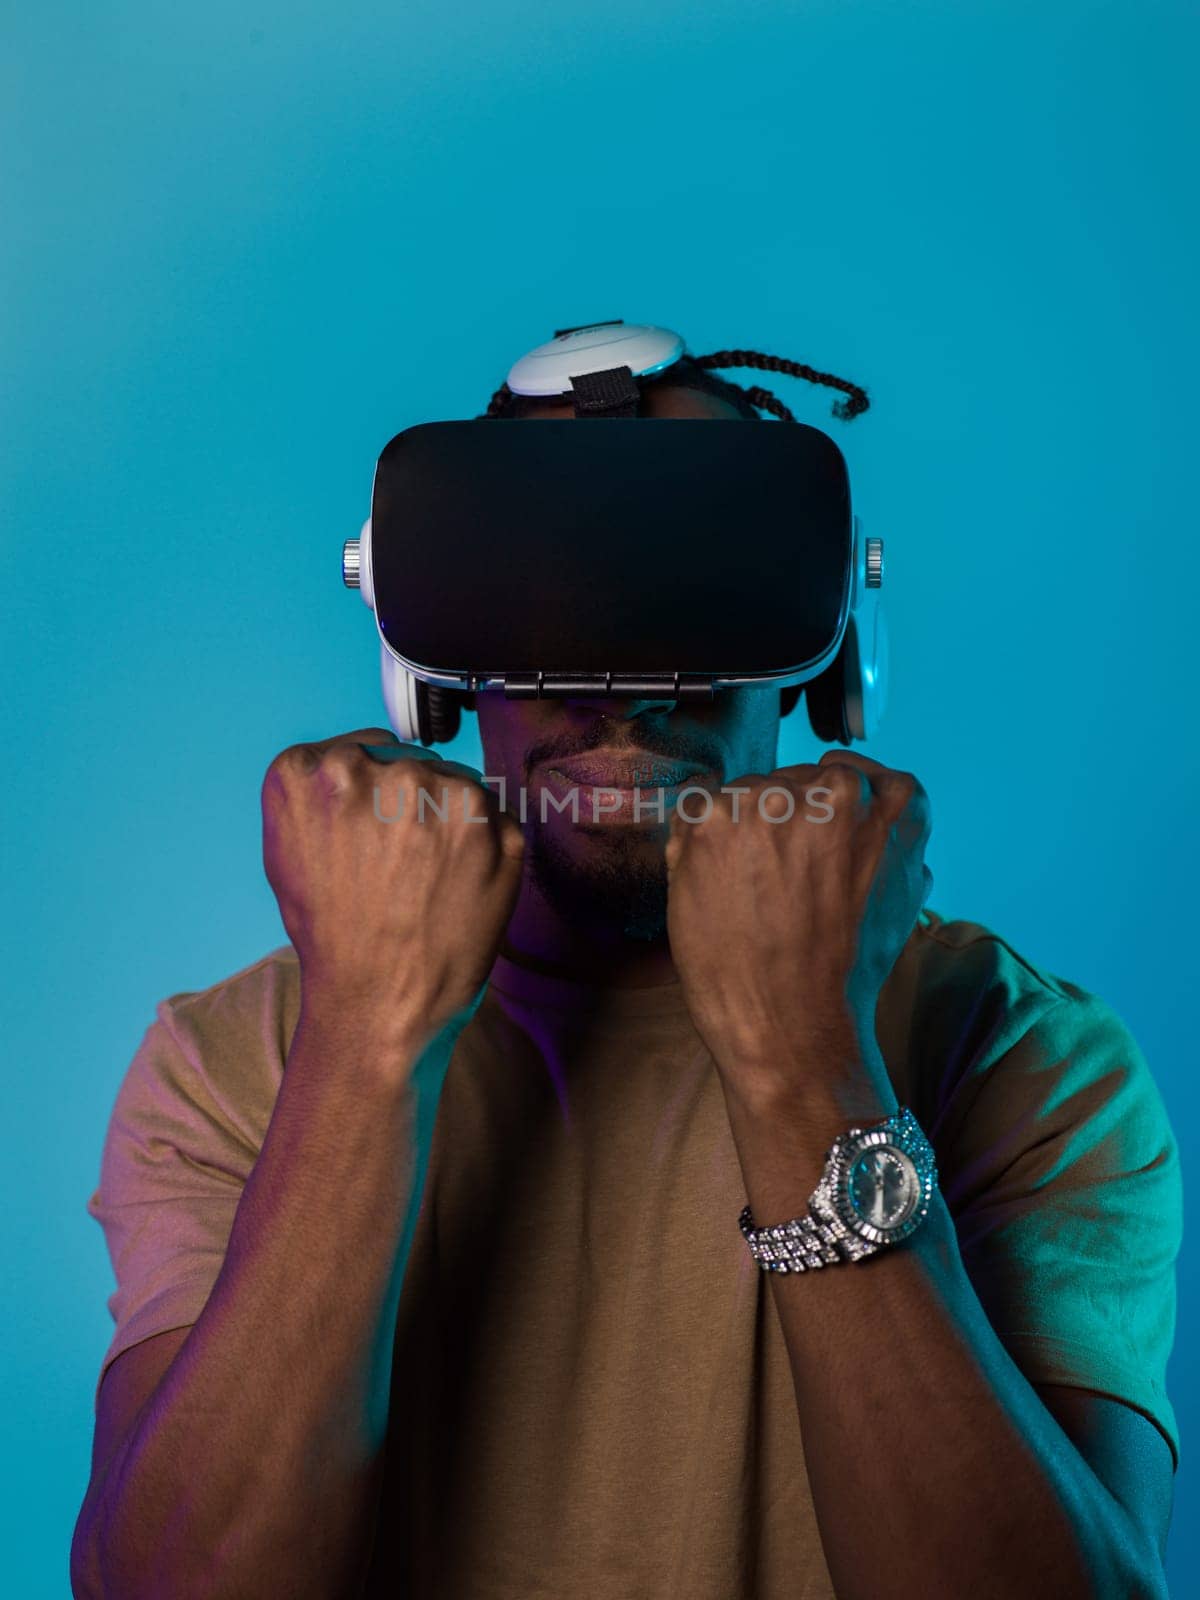 In an avant-garde scene, an African American man engages in cutting-edge virtual reality gaming, utilizing VR glasses to immerse himself in futuristic boxing games, set against a vivid blue background, showcasing the seamless fusion of technology, innovation, and interactive entertainment by dotshock